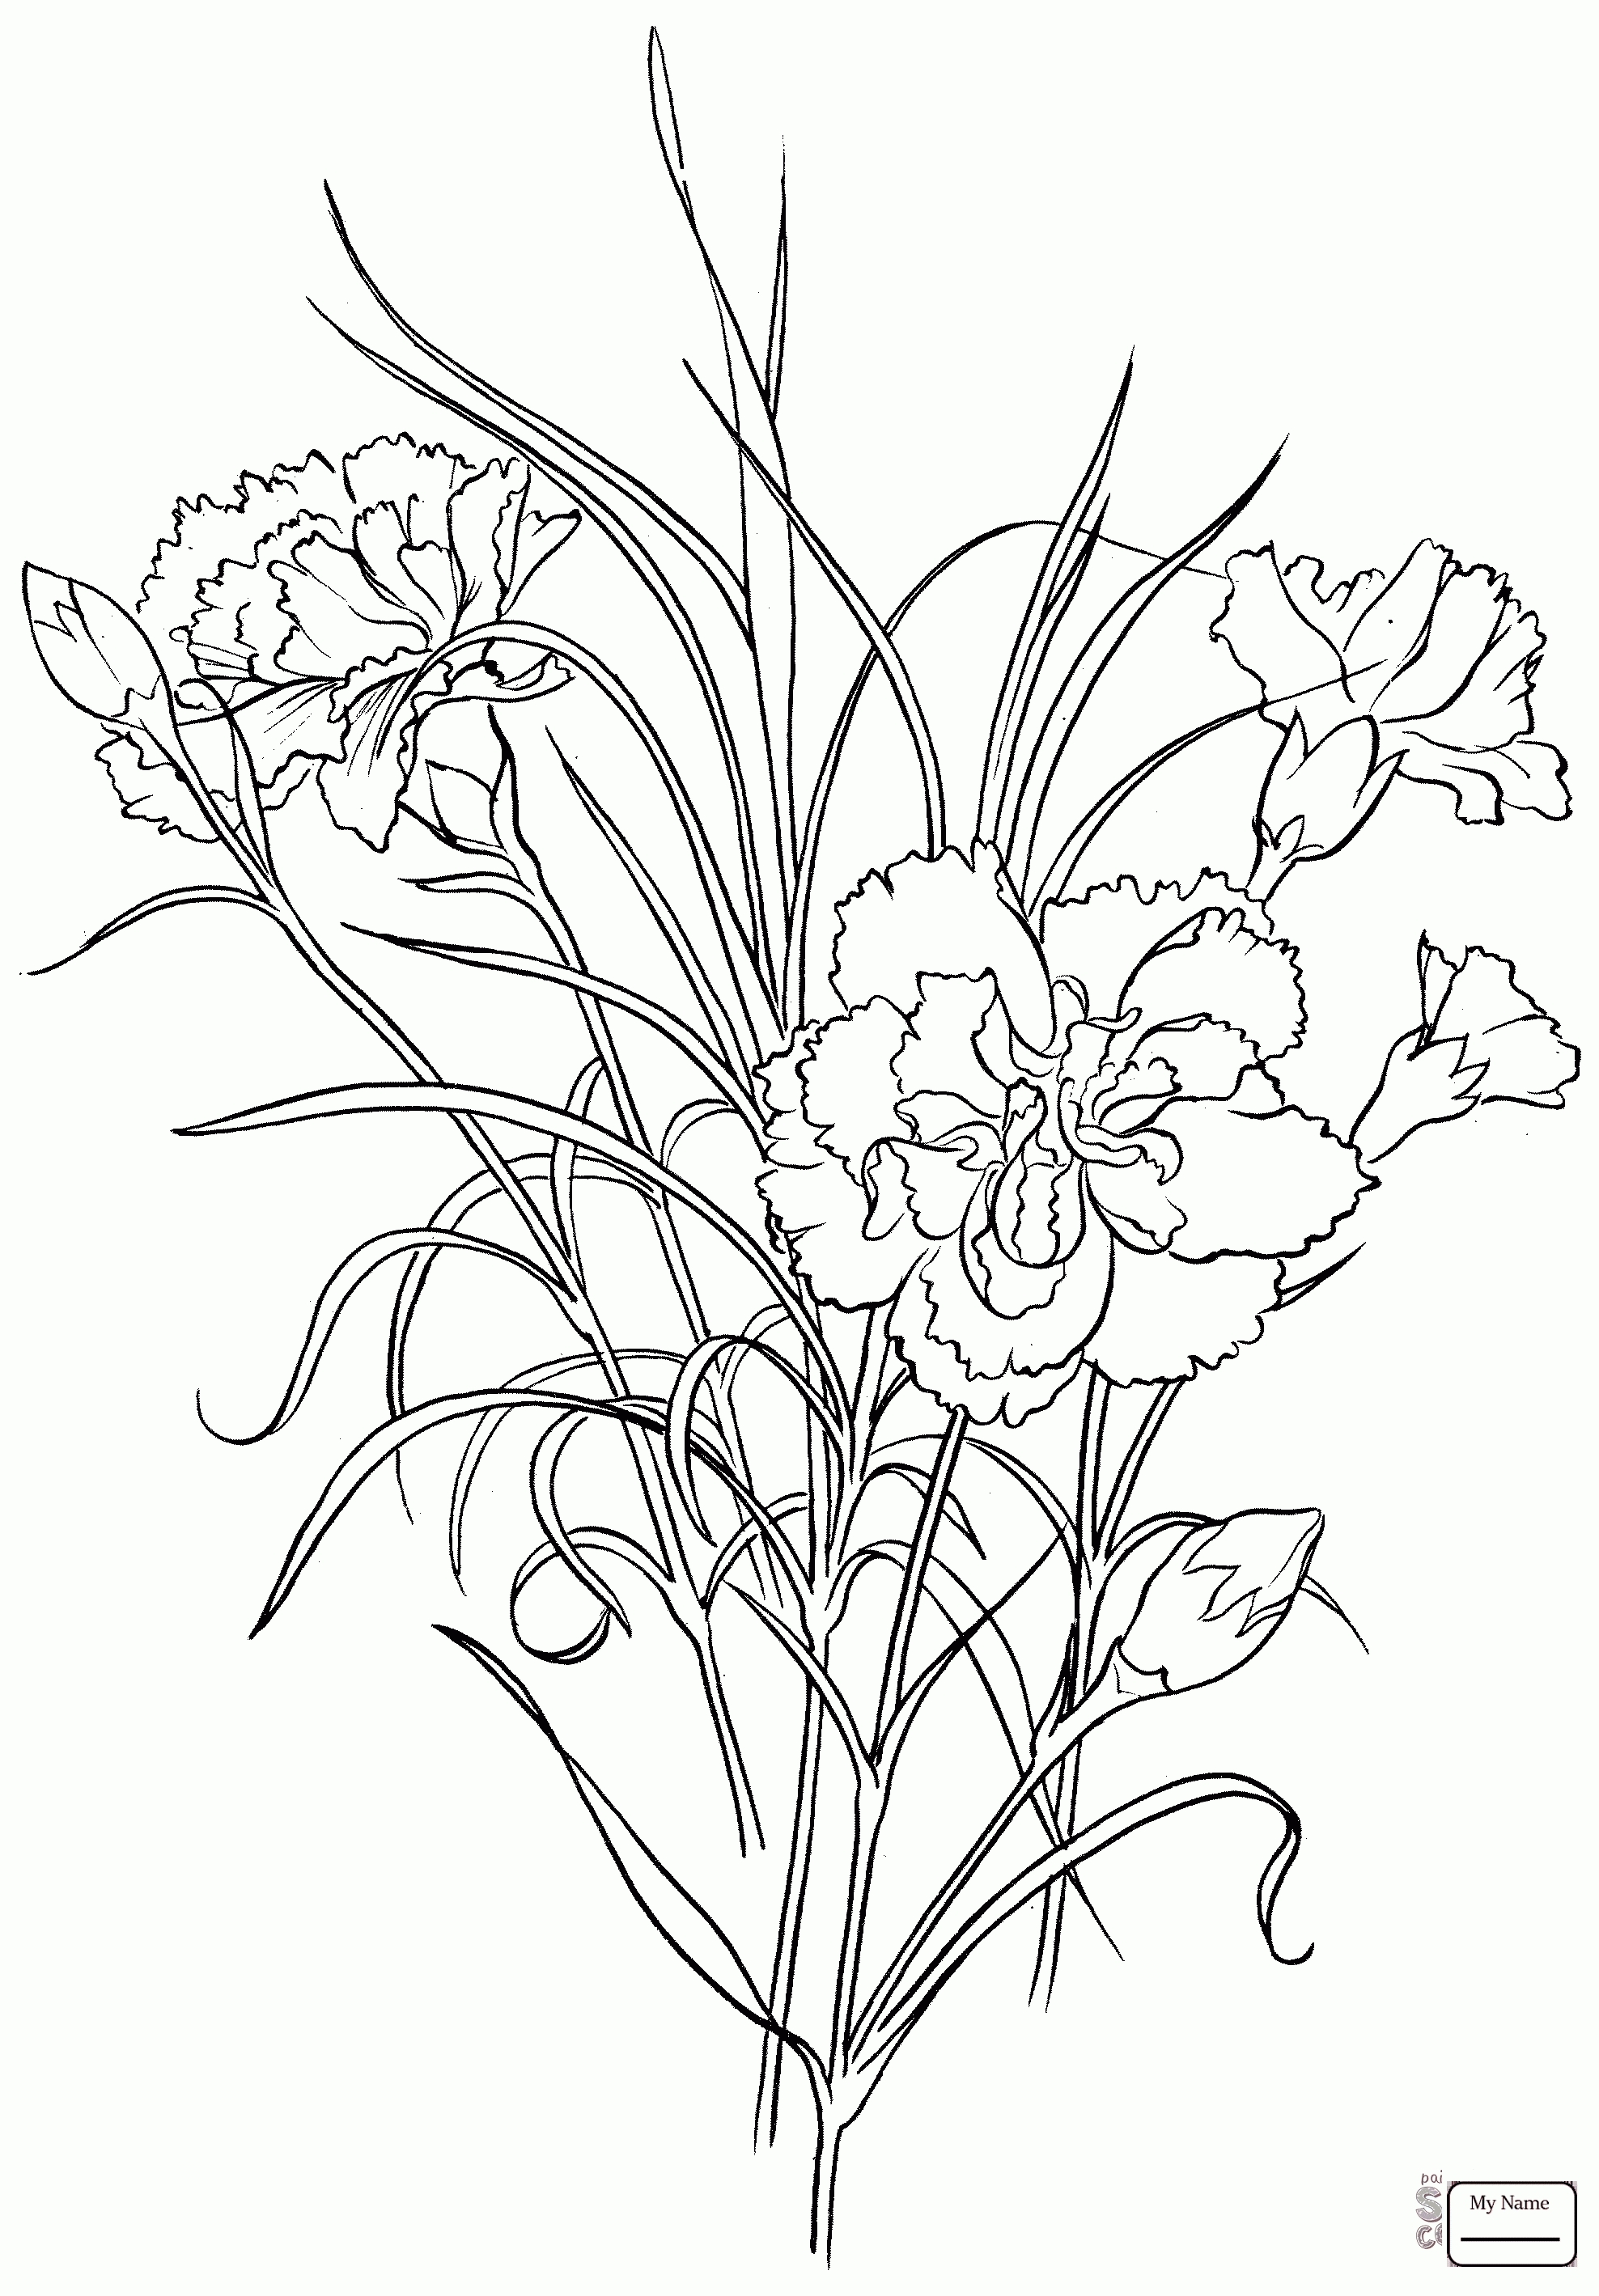 Carnation Flower Coloring Pages at GetColorings.com | Free printable